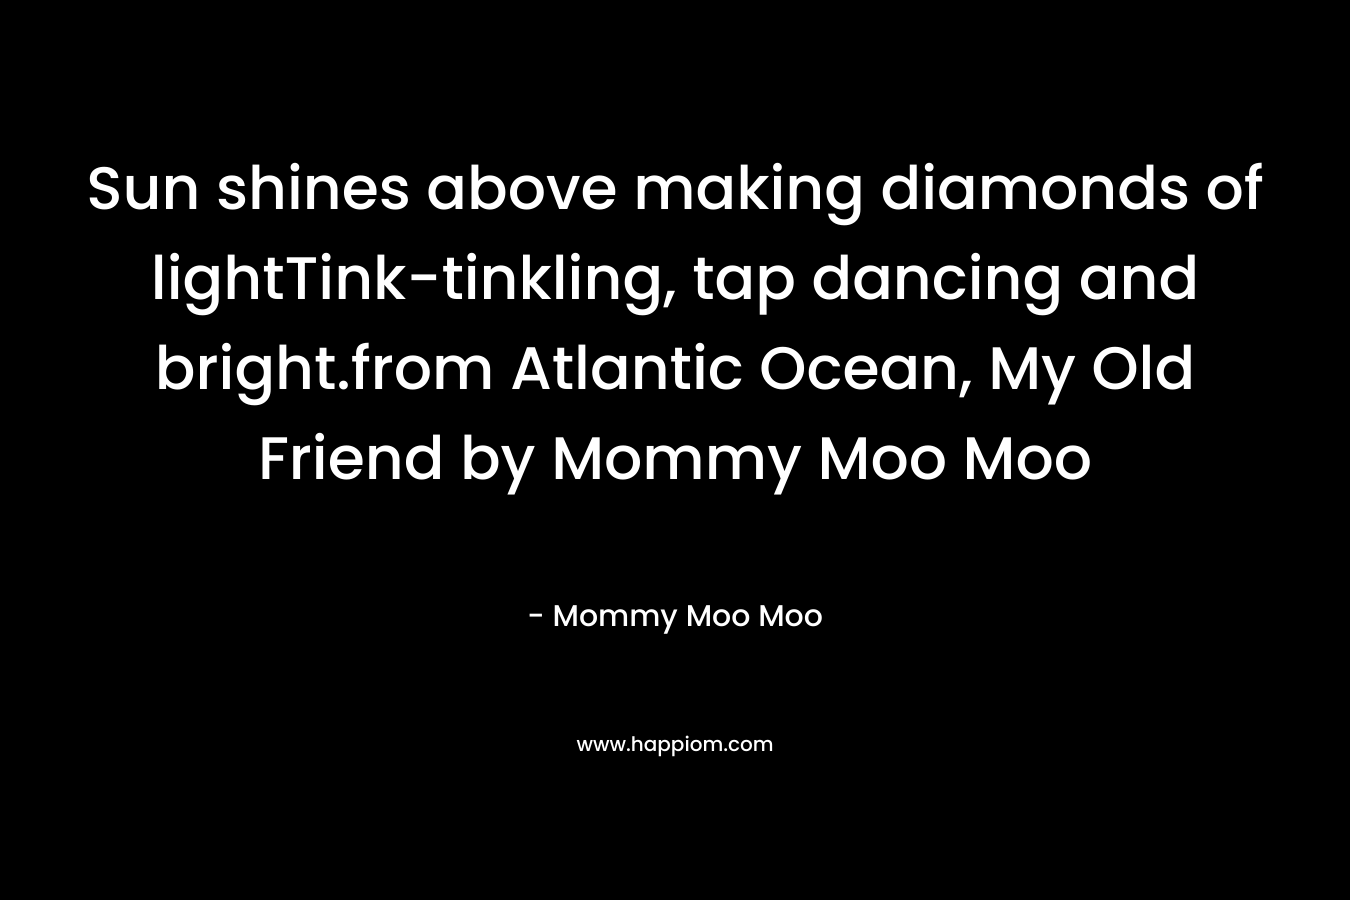 Sun shines above making diamonds of lightTink-tinkling, tap dancing and bright.from Atlantic Ocean, My Old Friend by Mommy Moo Moo